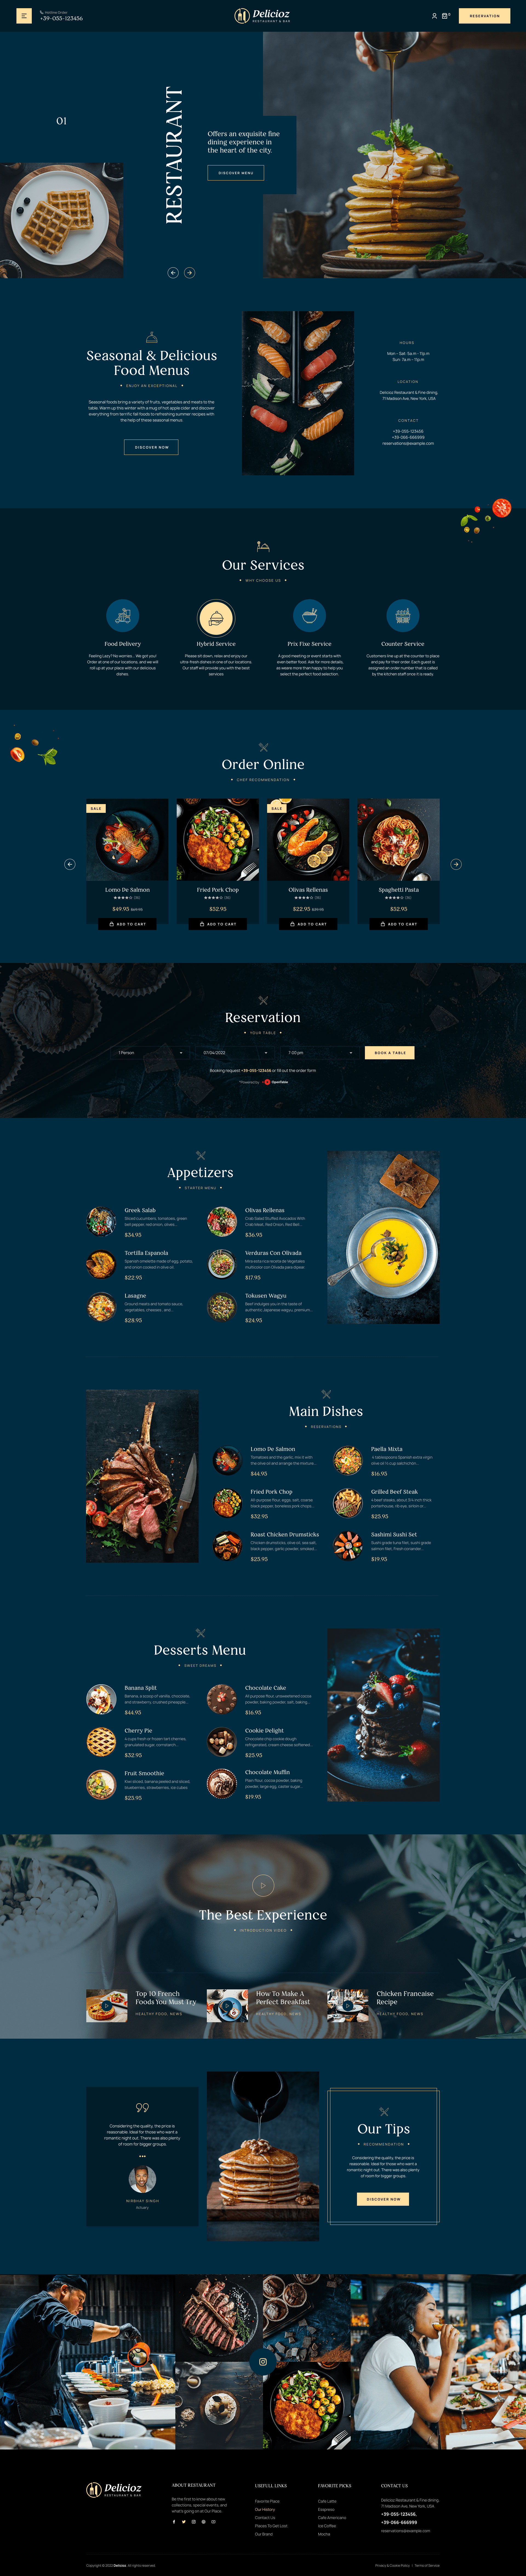 Page image of a charming wordpress template on a restaurant theme.